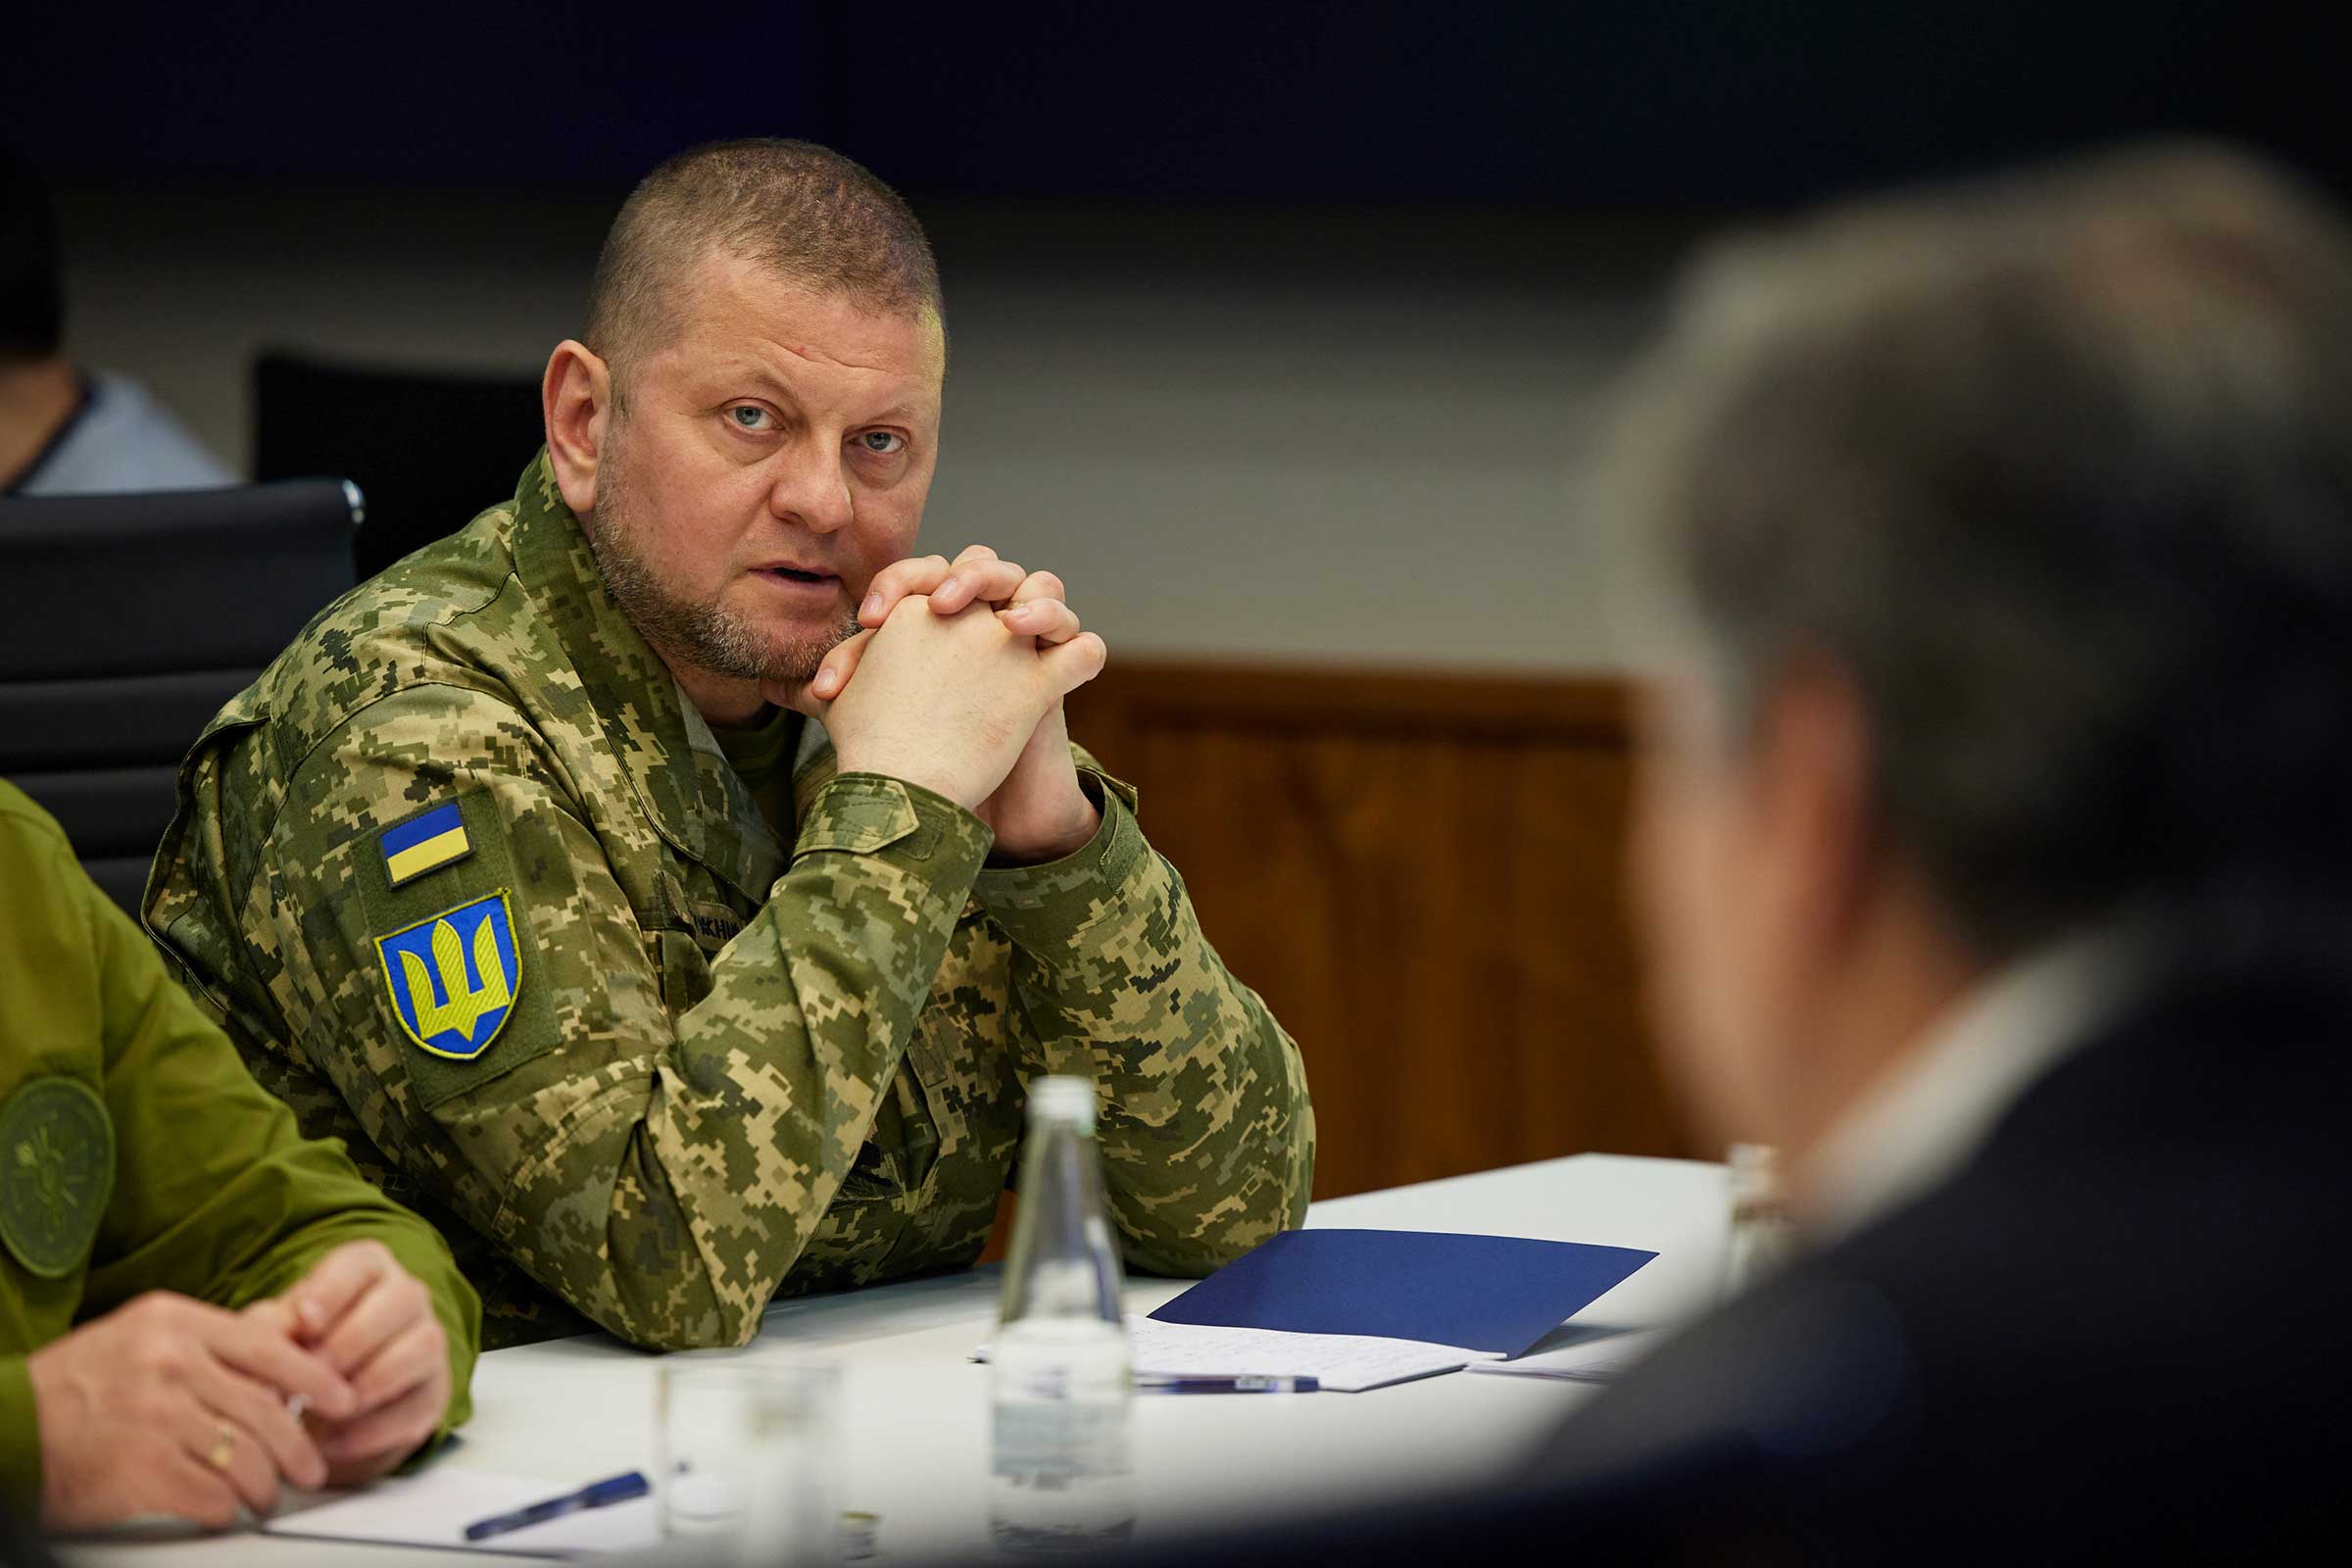 Commander-in-Chief of the Armed Forces of Ukraine Valeriy Zaluzhny attends a meeting with Ukraine's President Volodymyr Zelenskiy, U.S. Secretary of State Antony Blinken and U.S. Defense Secretary Lloyd Austin, as Russia's attack on Ukraine continues, in Kyiv on April 24, 2022. (Ukrainian Presidential Press Service/Reuters)